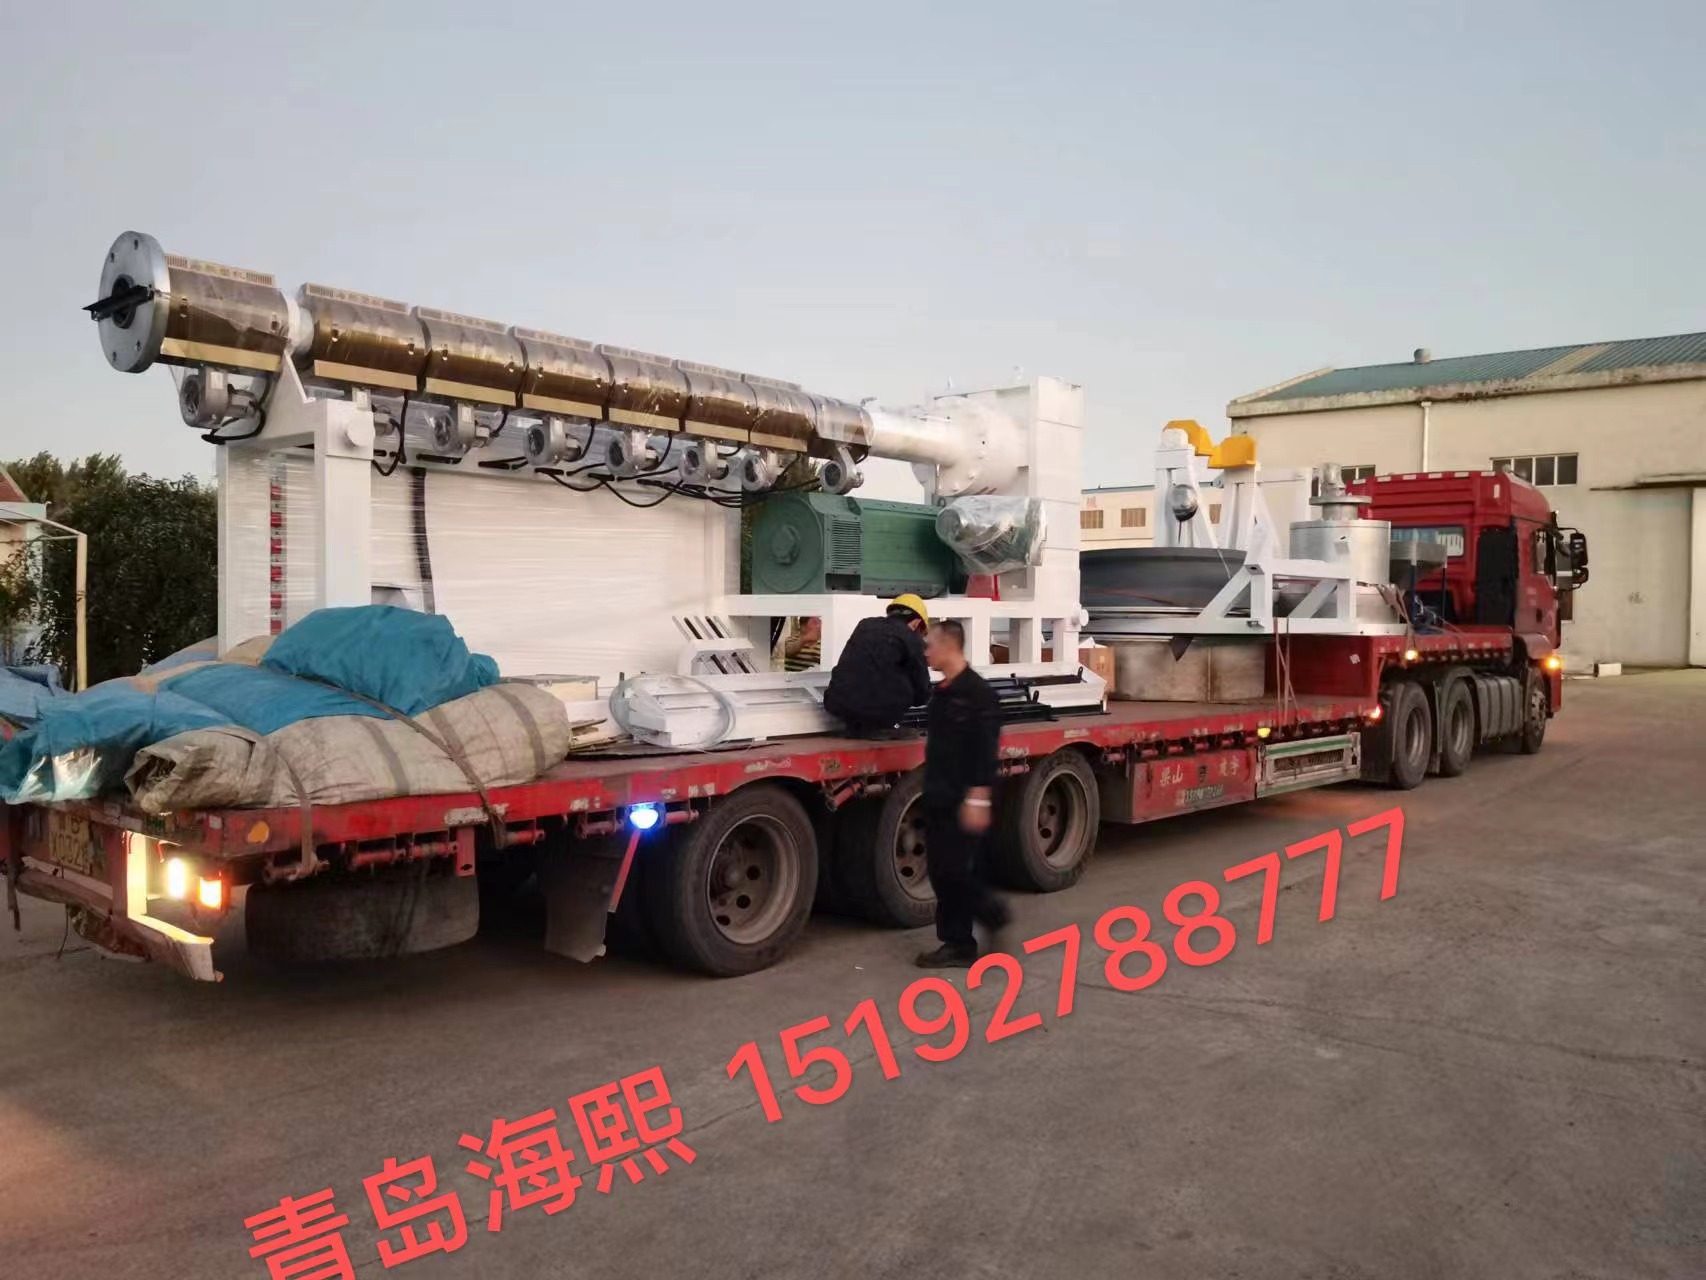 The second car of Hebei Shengcang Pipeline Anti-co